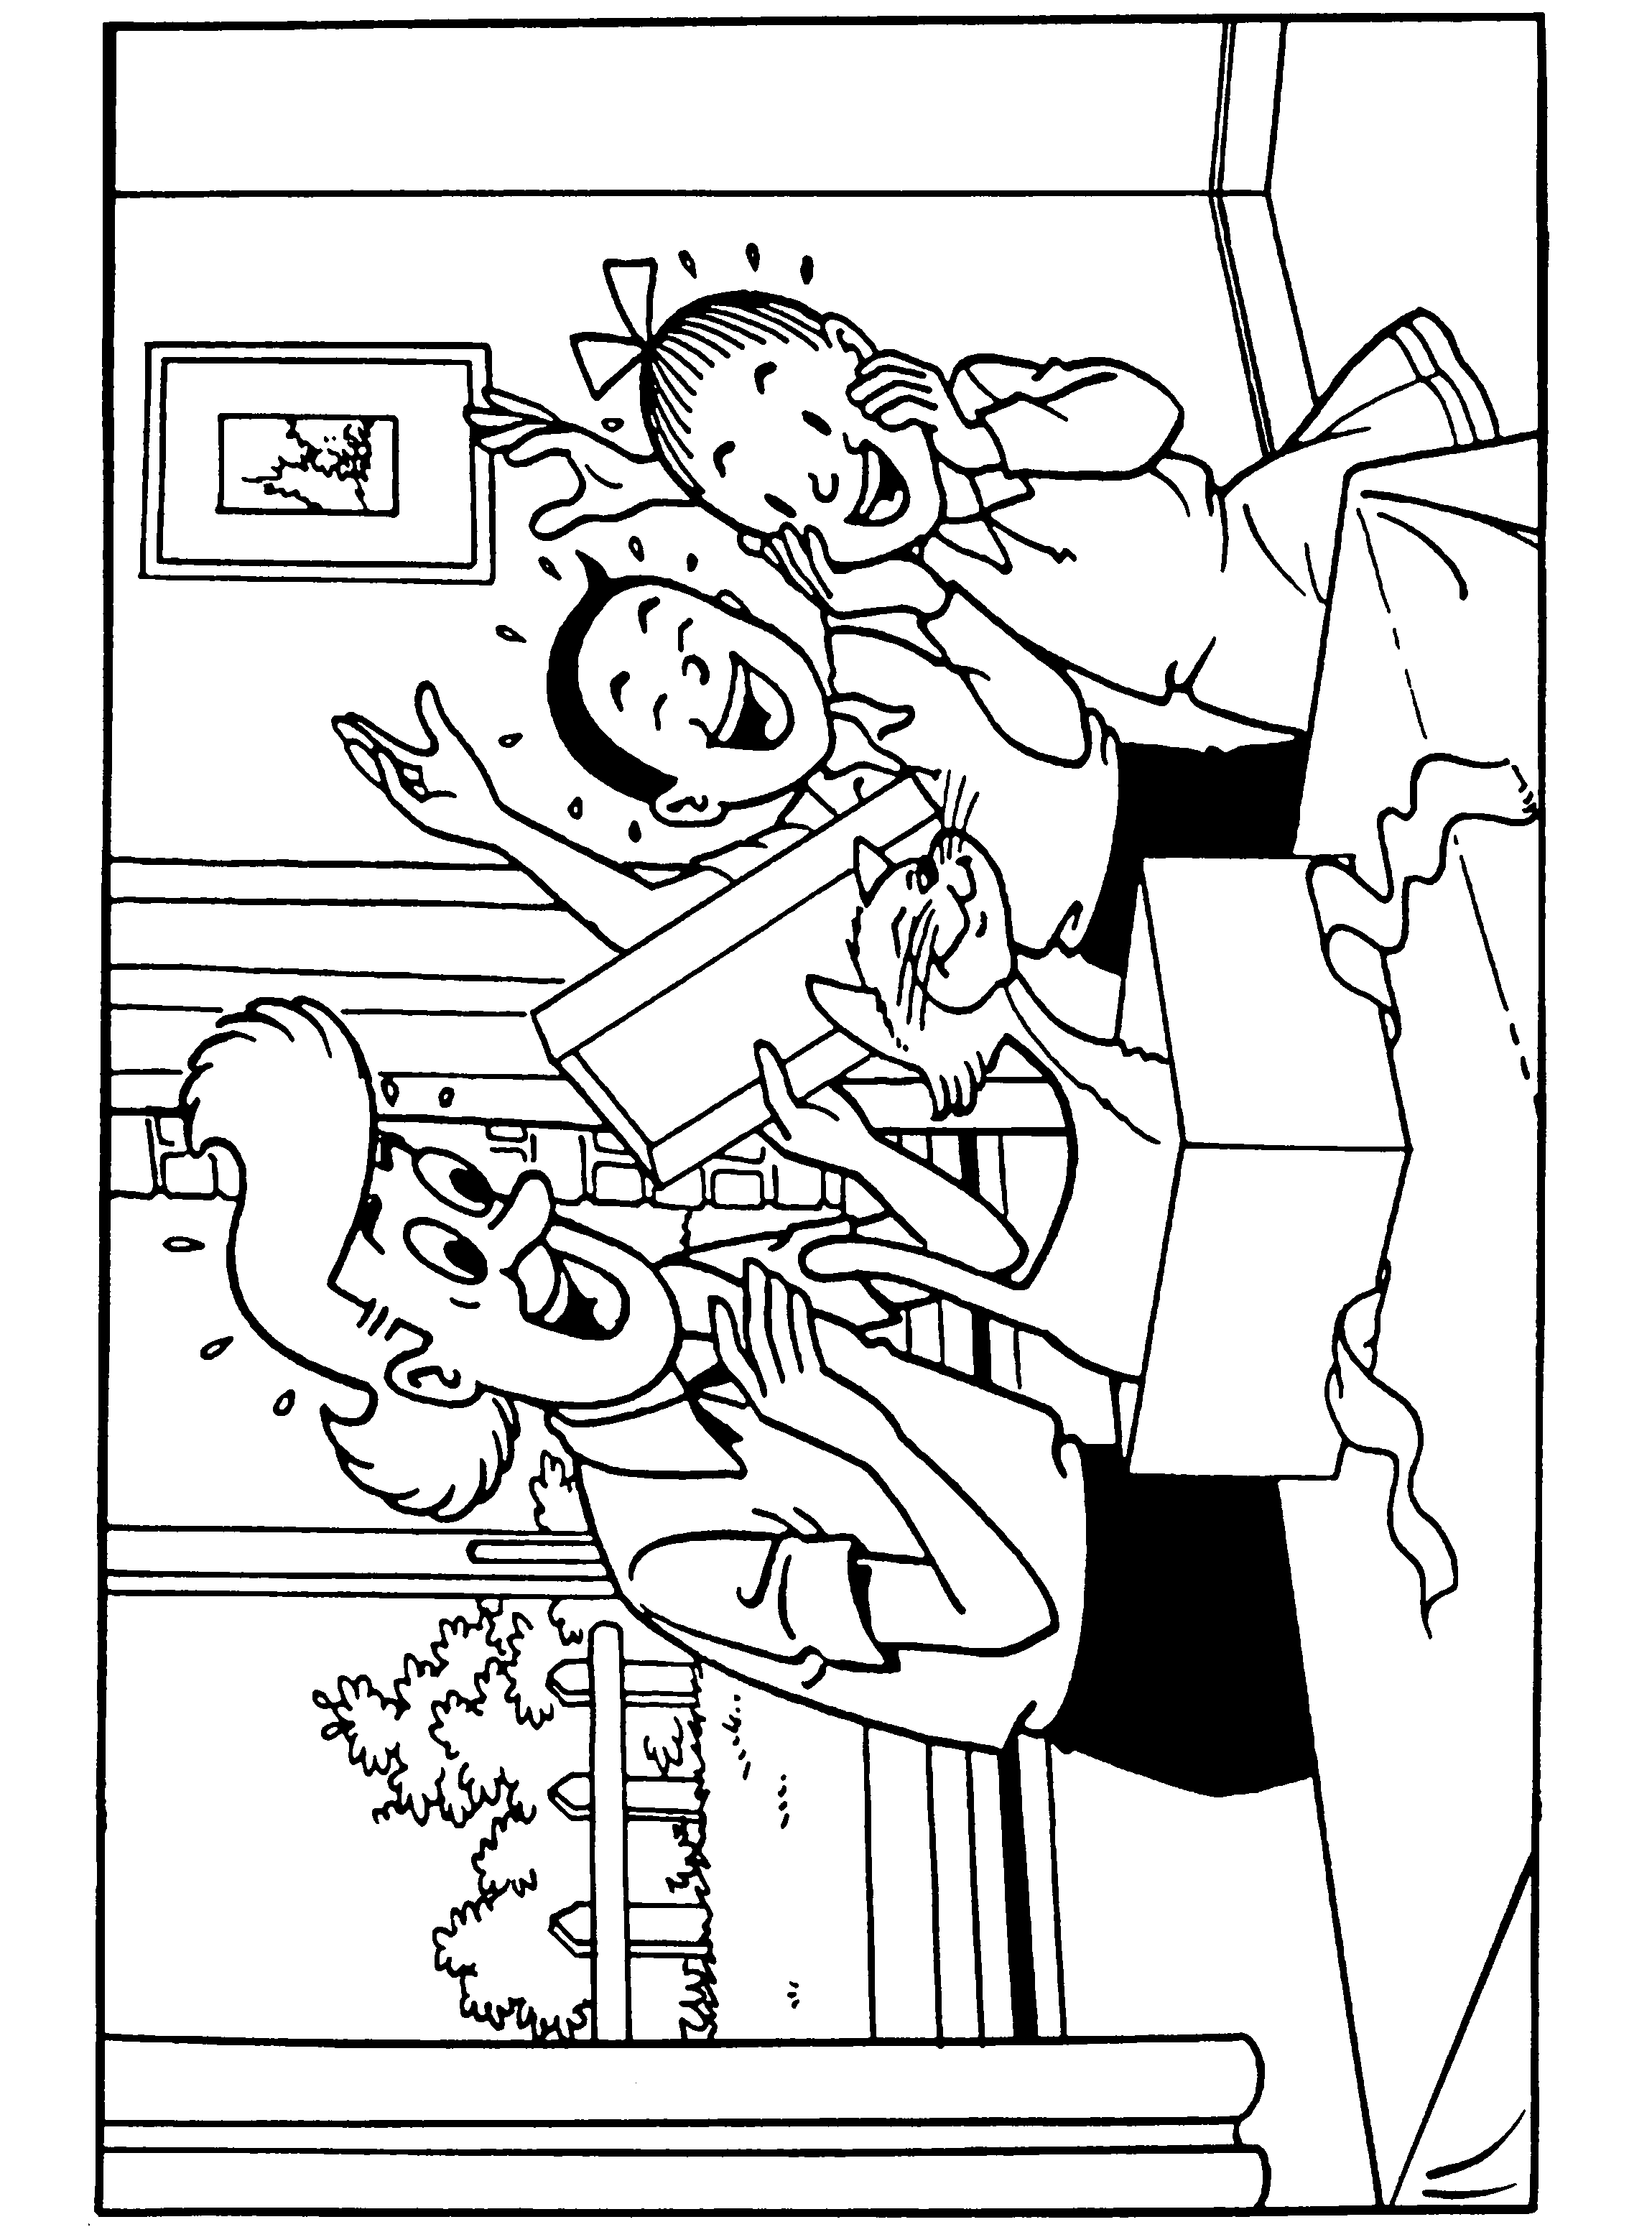 Spike and suzy Coloring Pages